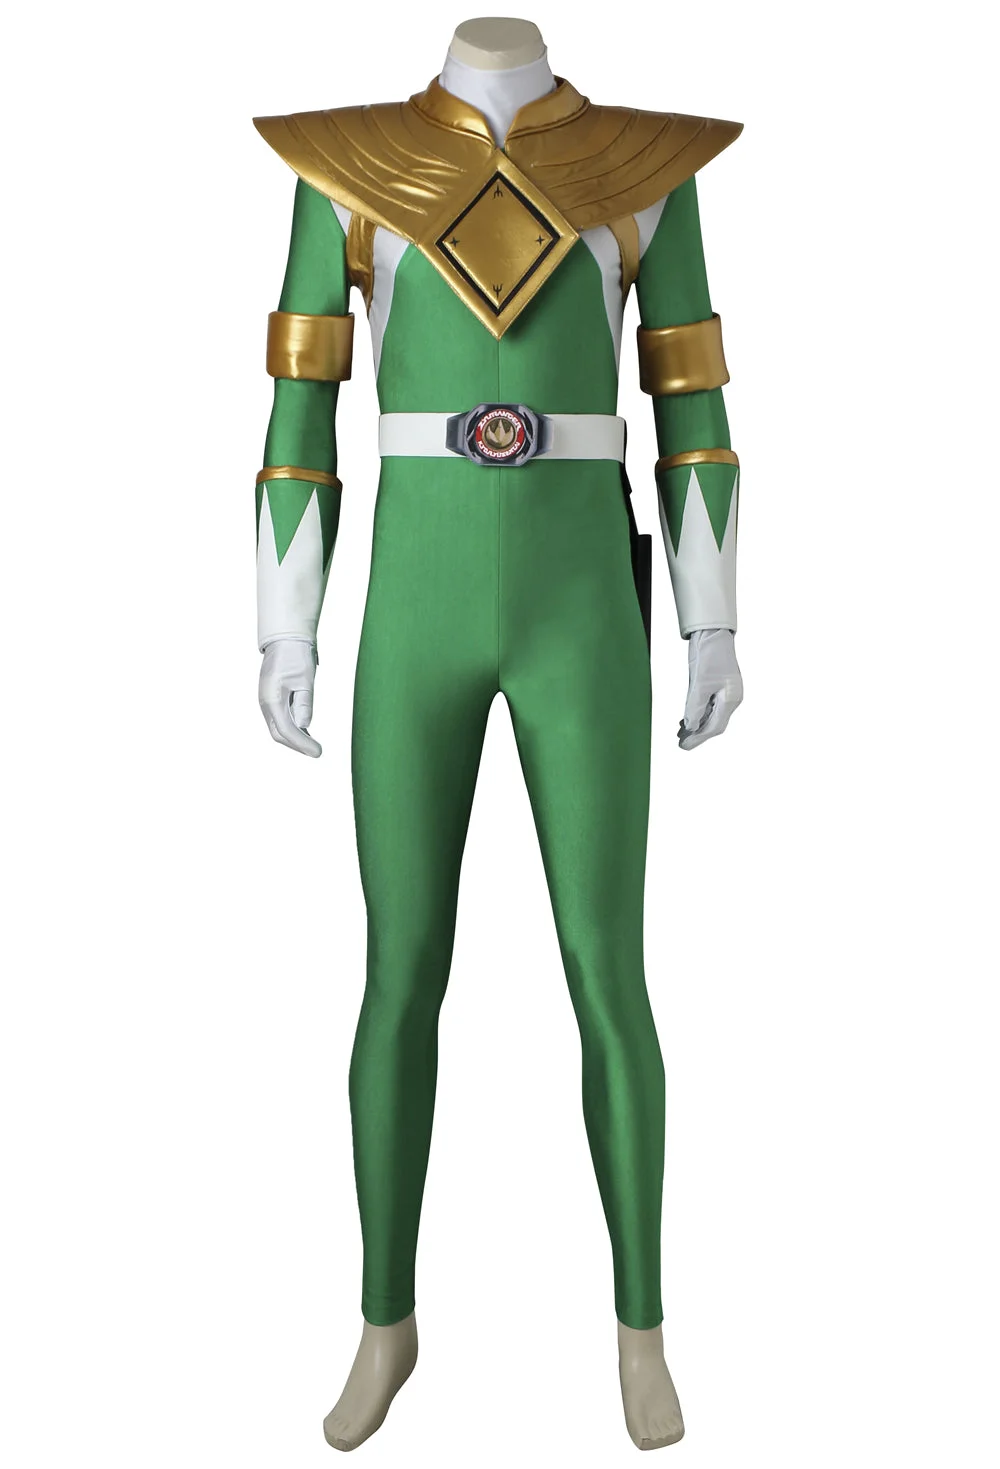 Green Ranger Cosplay Costume Tommy Oliver Mighty Morphin Power Rangers halloween outfit